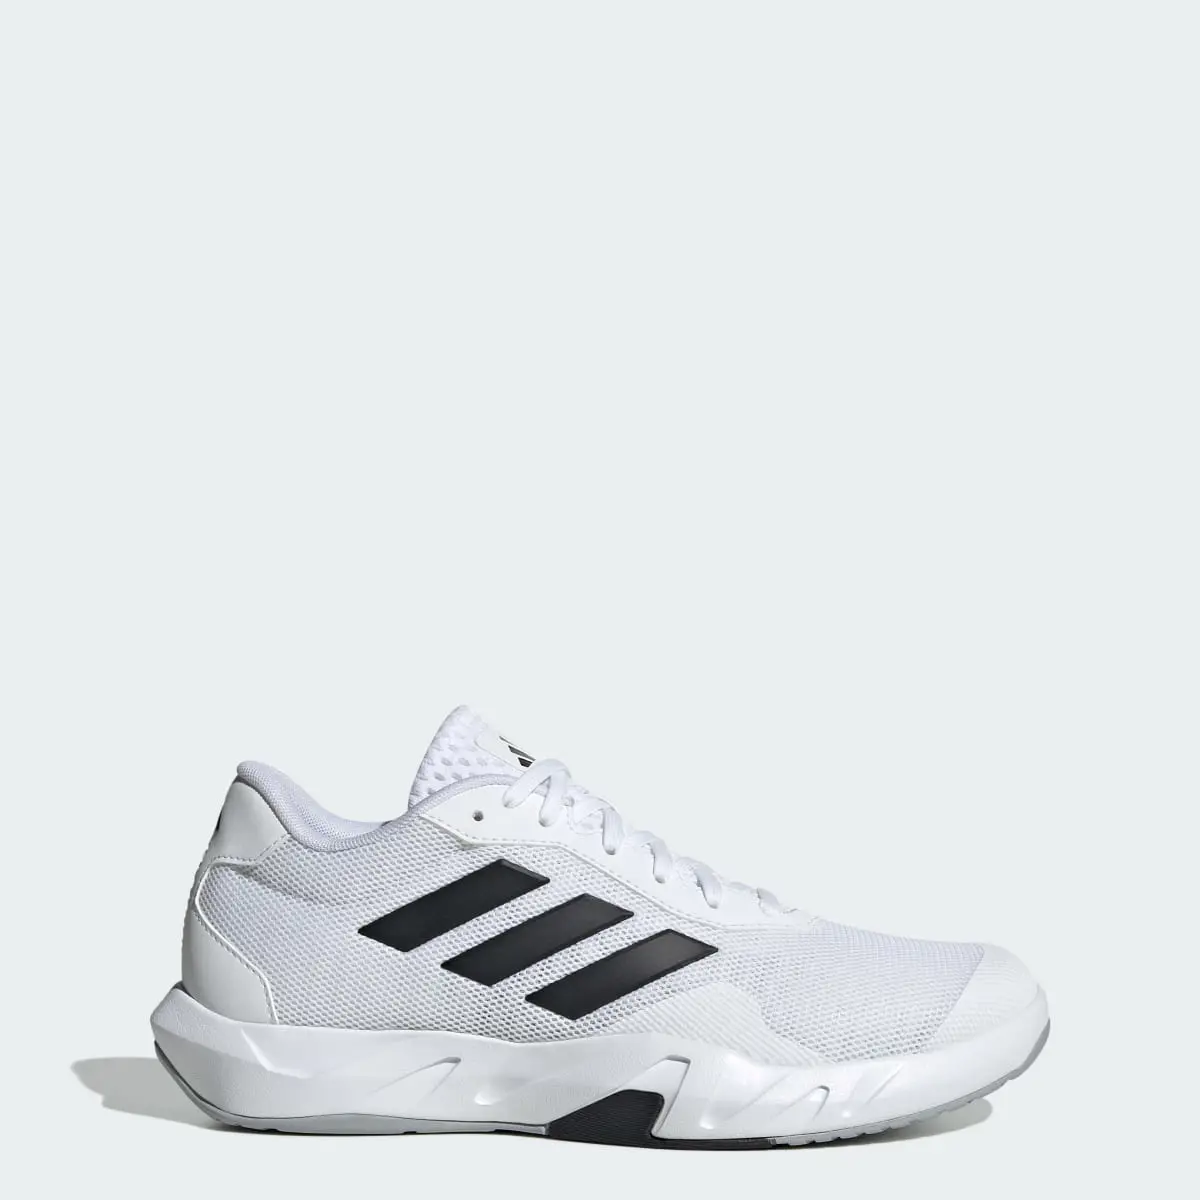 Adidas Amplimove Trainer Shoes. 1